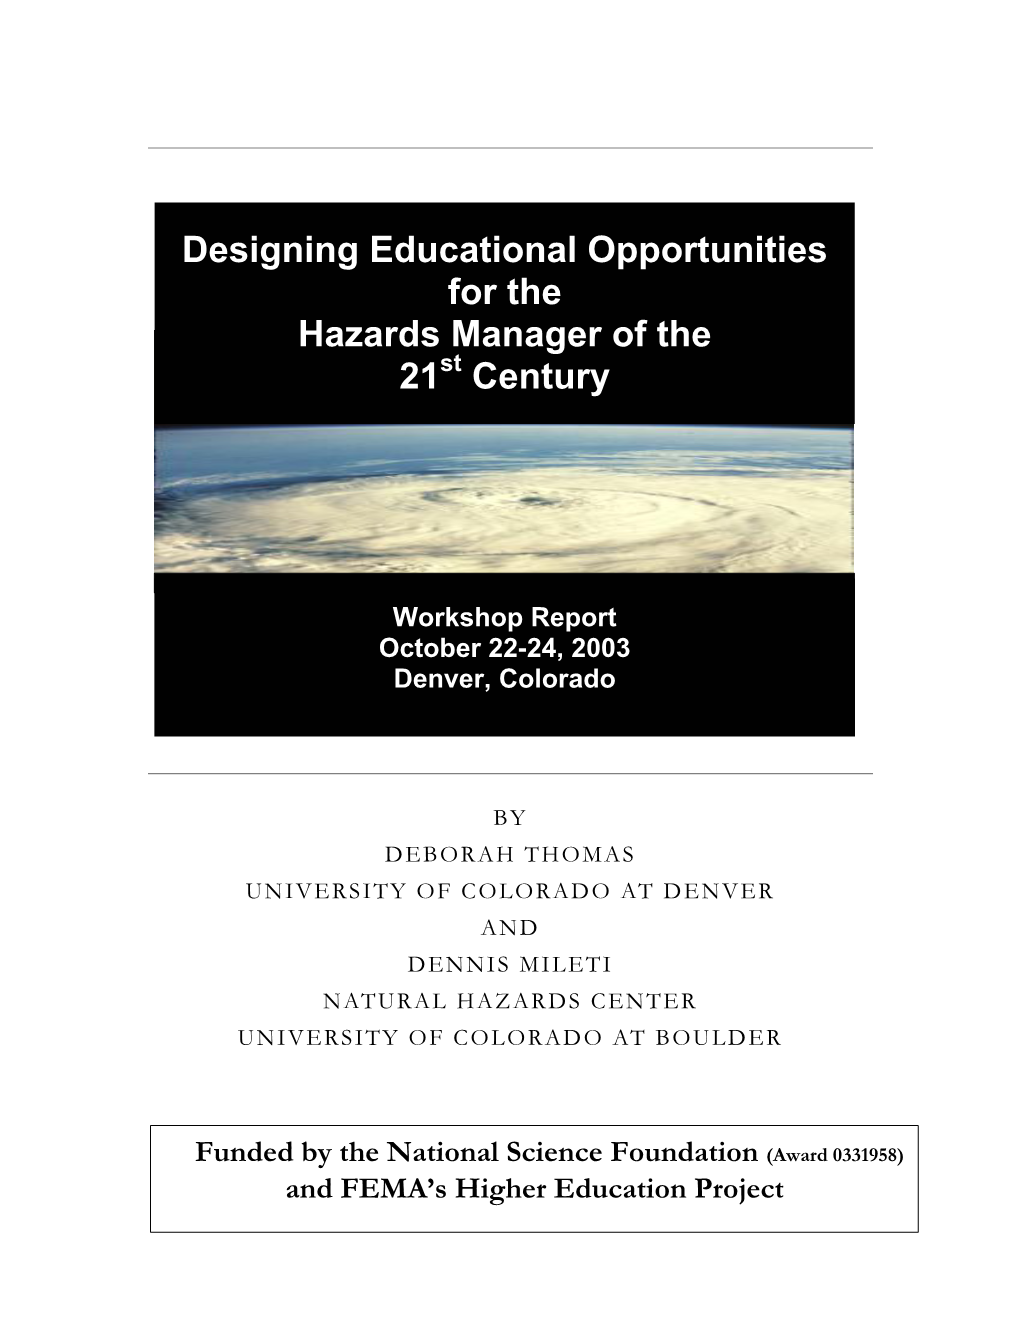 Designing Educational Opportunities for the Hazards Manager of the 21St Century